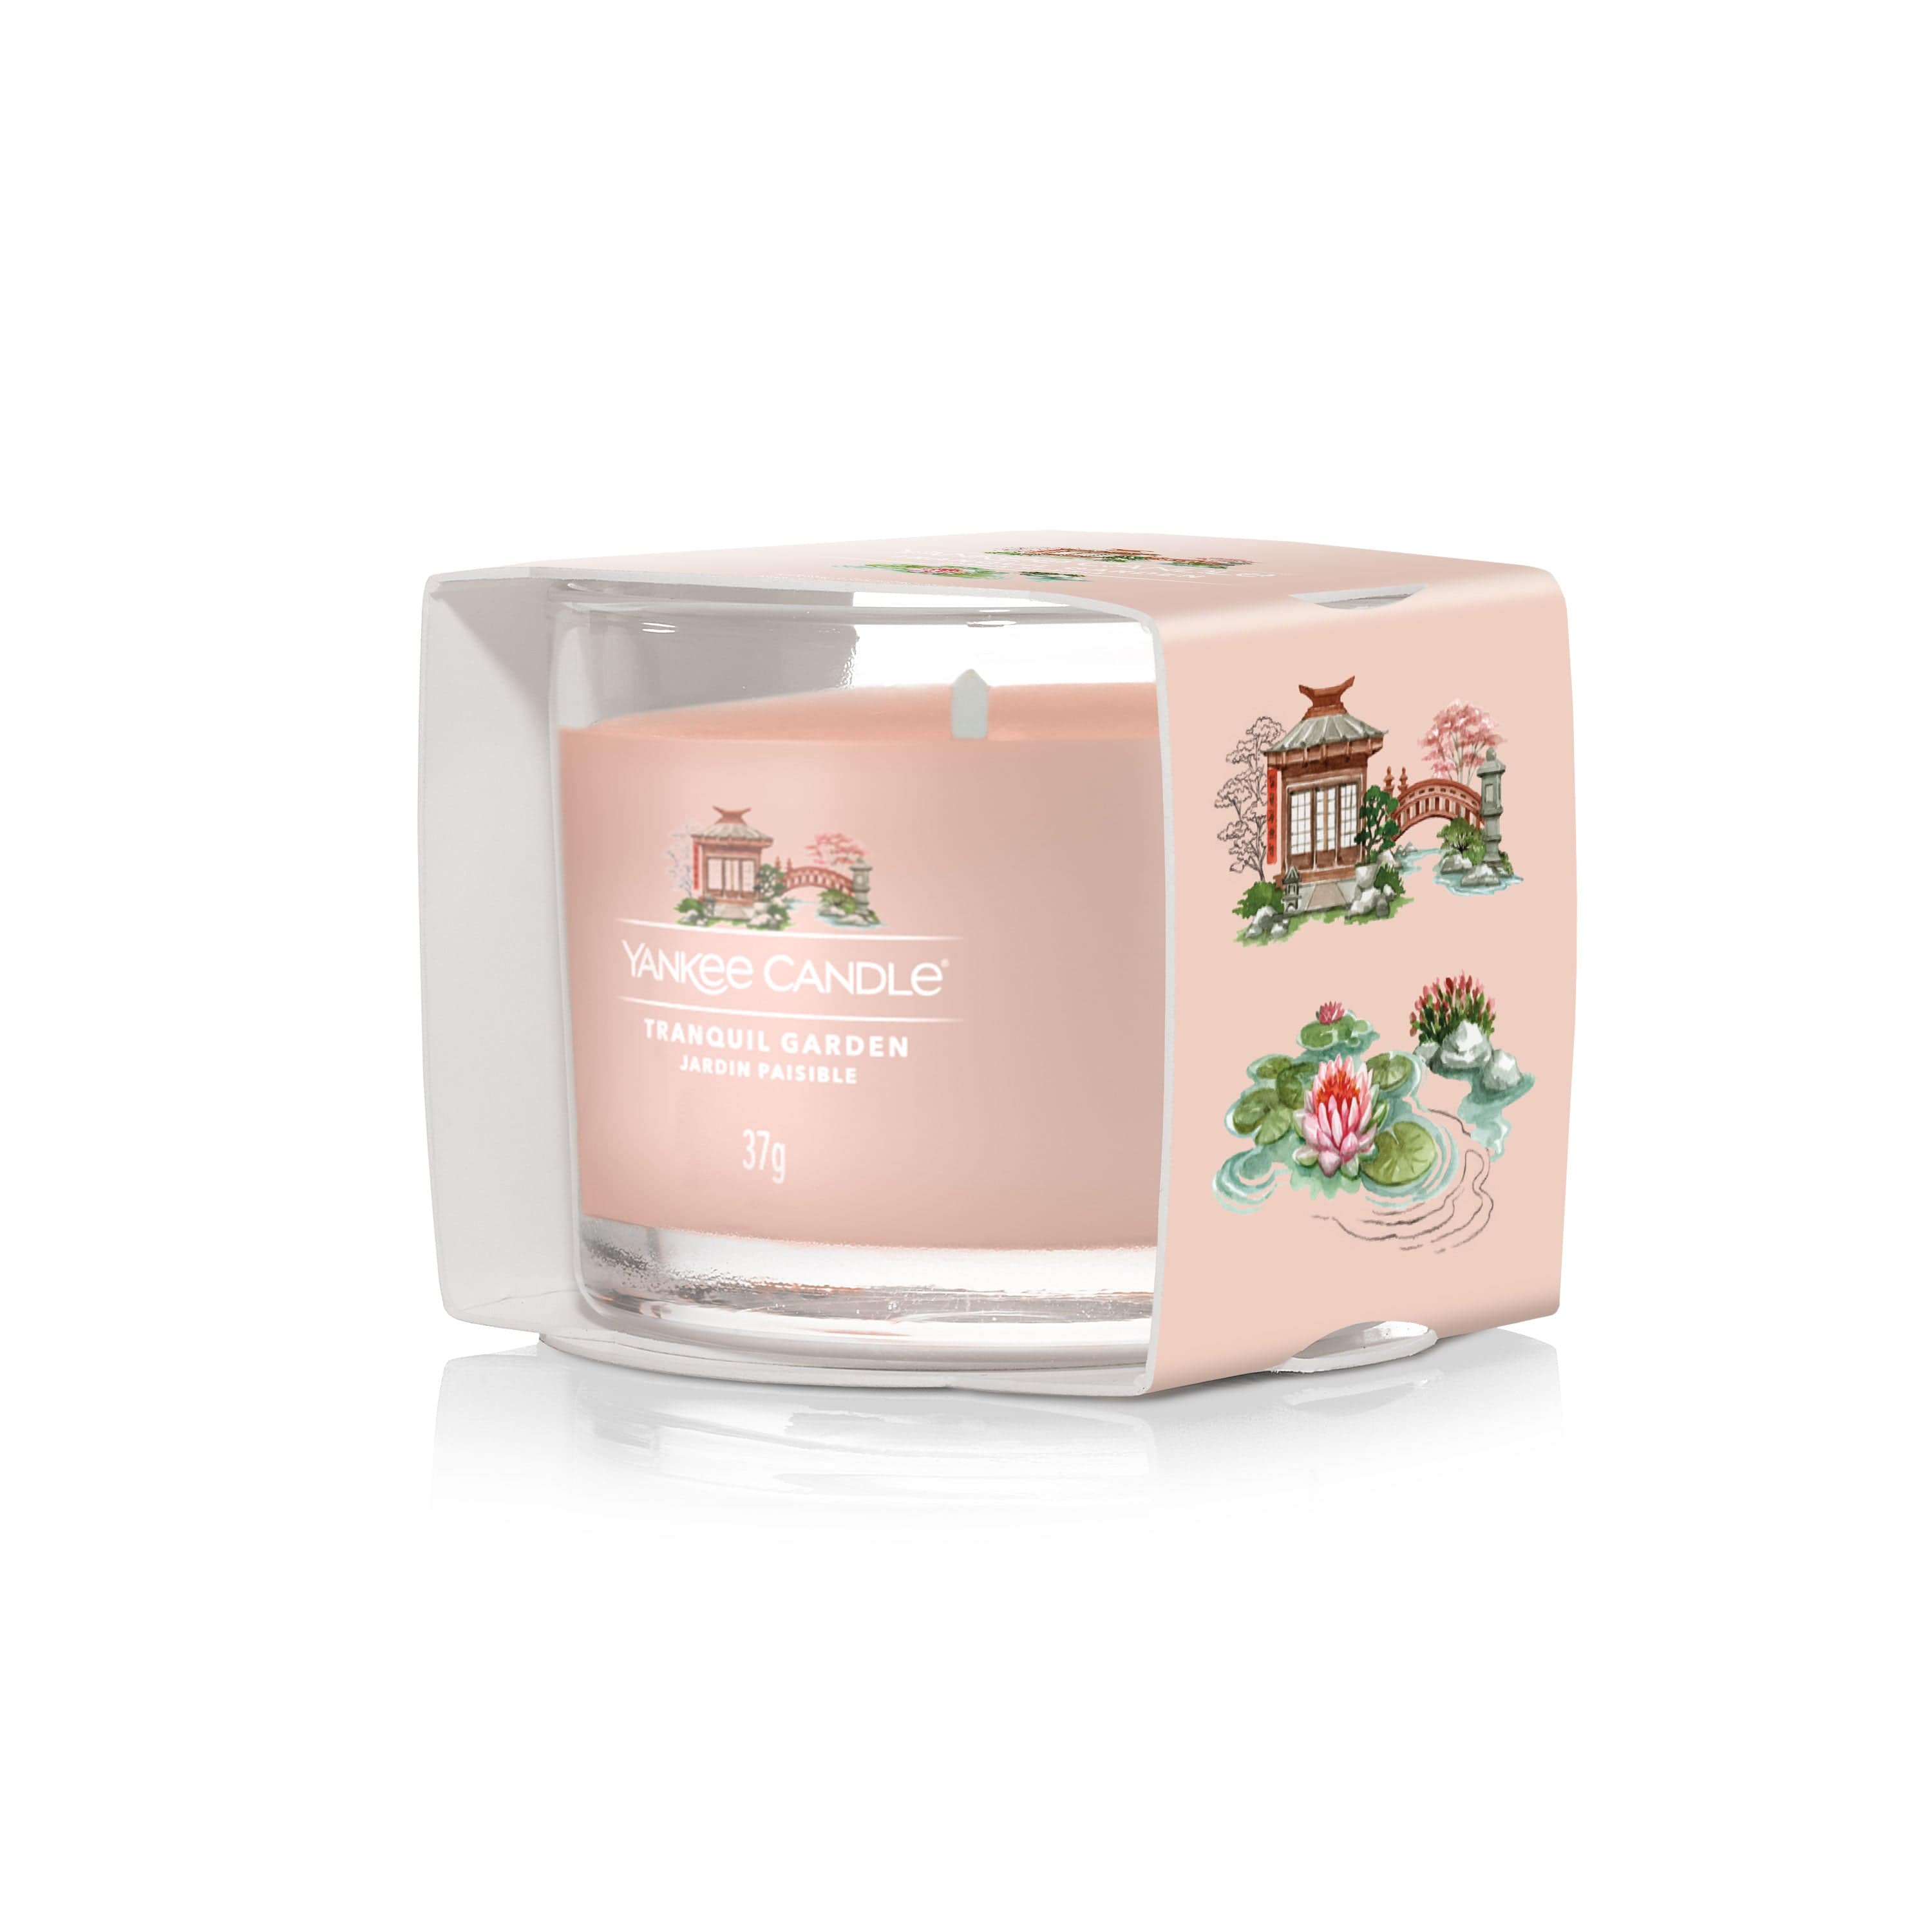 Yankee Candle Votive Candle Yankee Candle Filled Glass Votive 3 Pack - Tranquil Garden